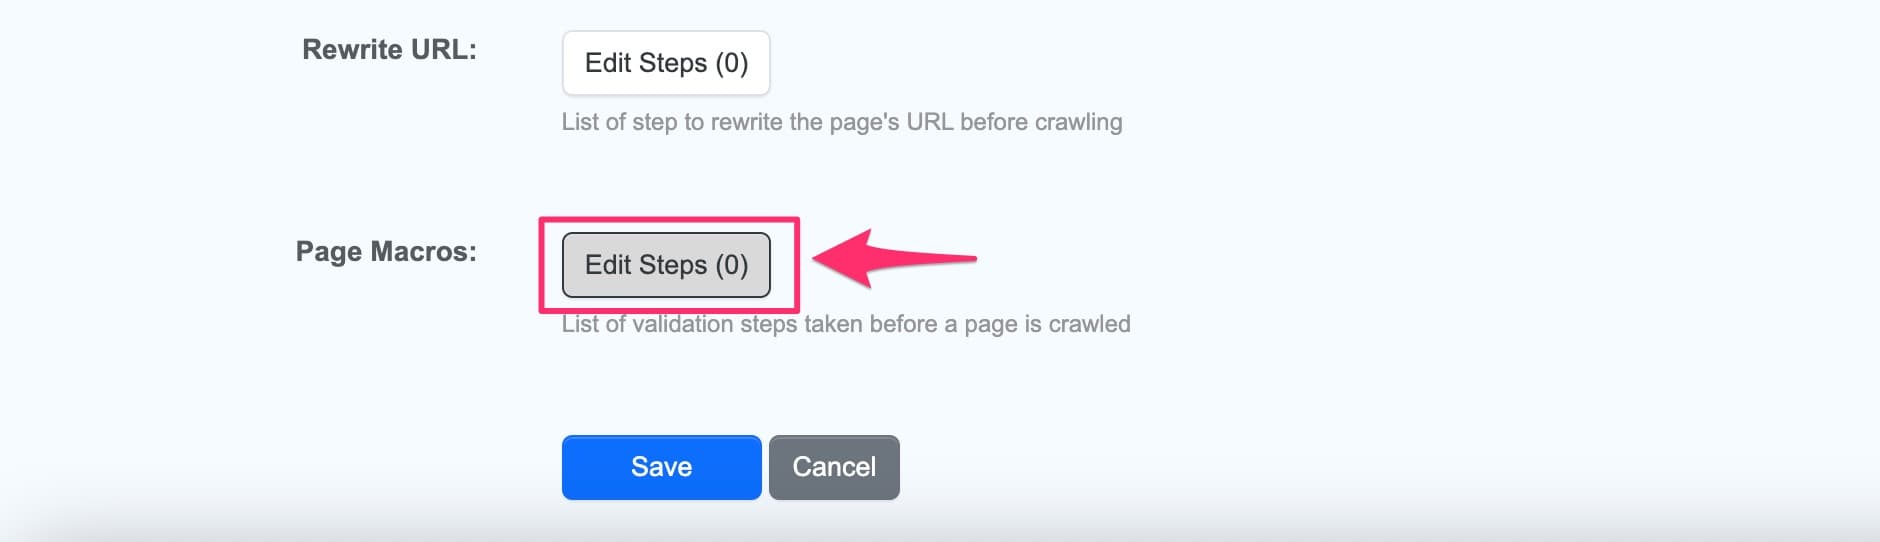 Adding steps to be executed before crawling a page